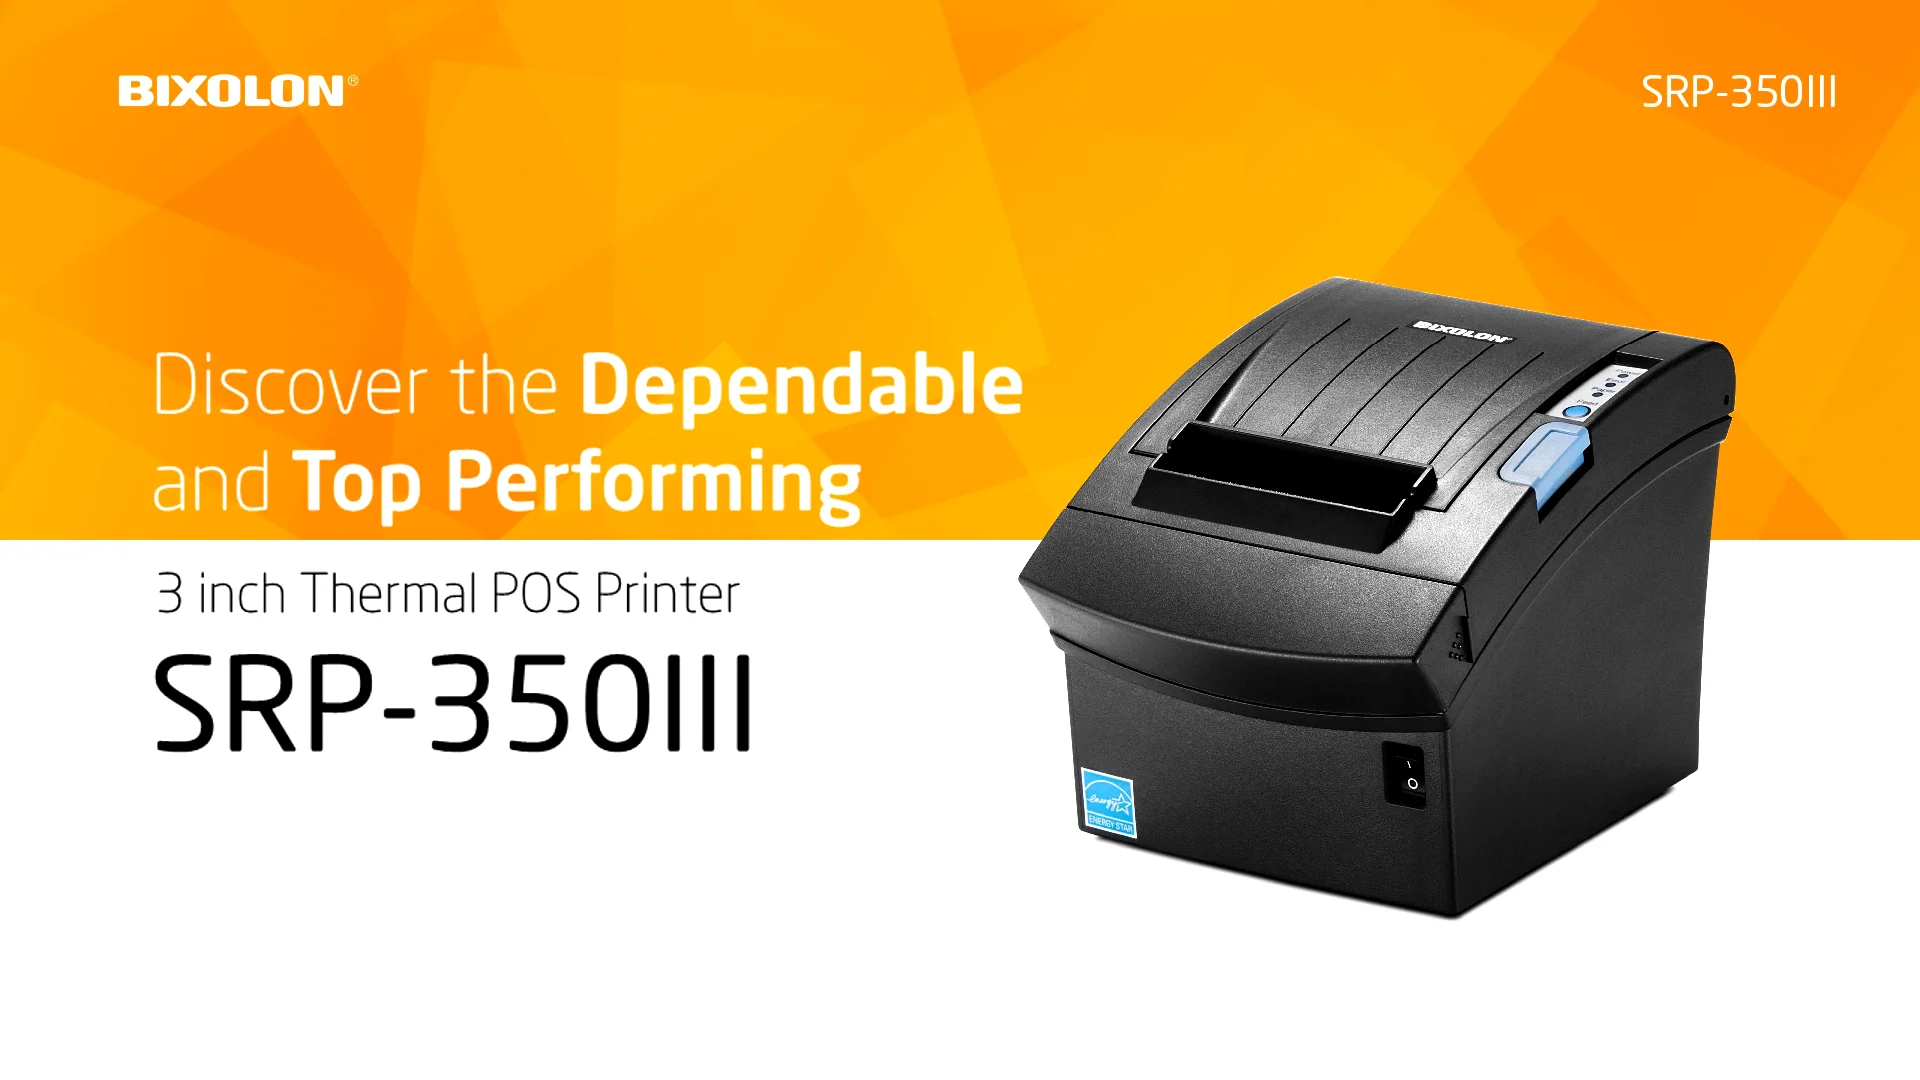 Discover the Dependable and Top Performing, BIXOLON SRP-350III on